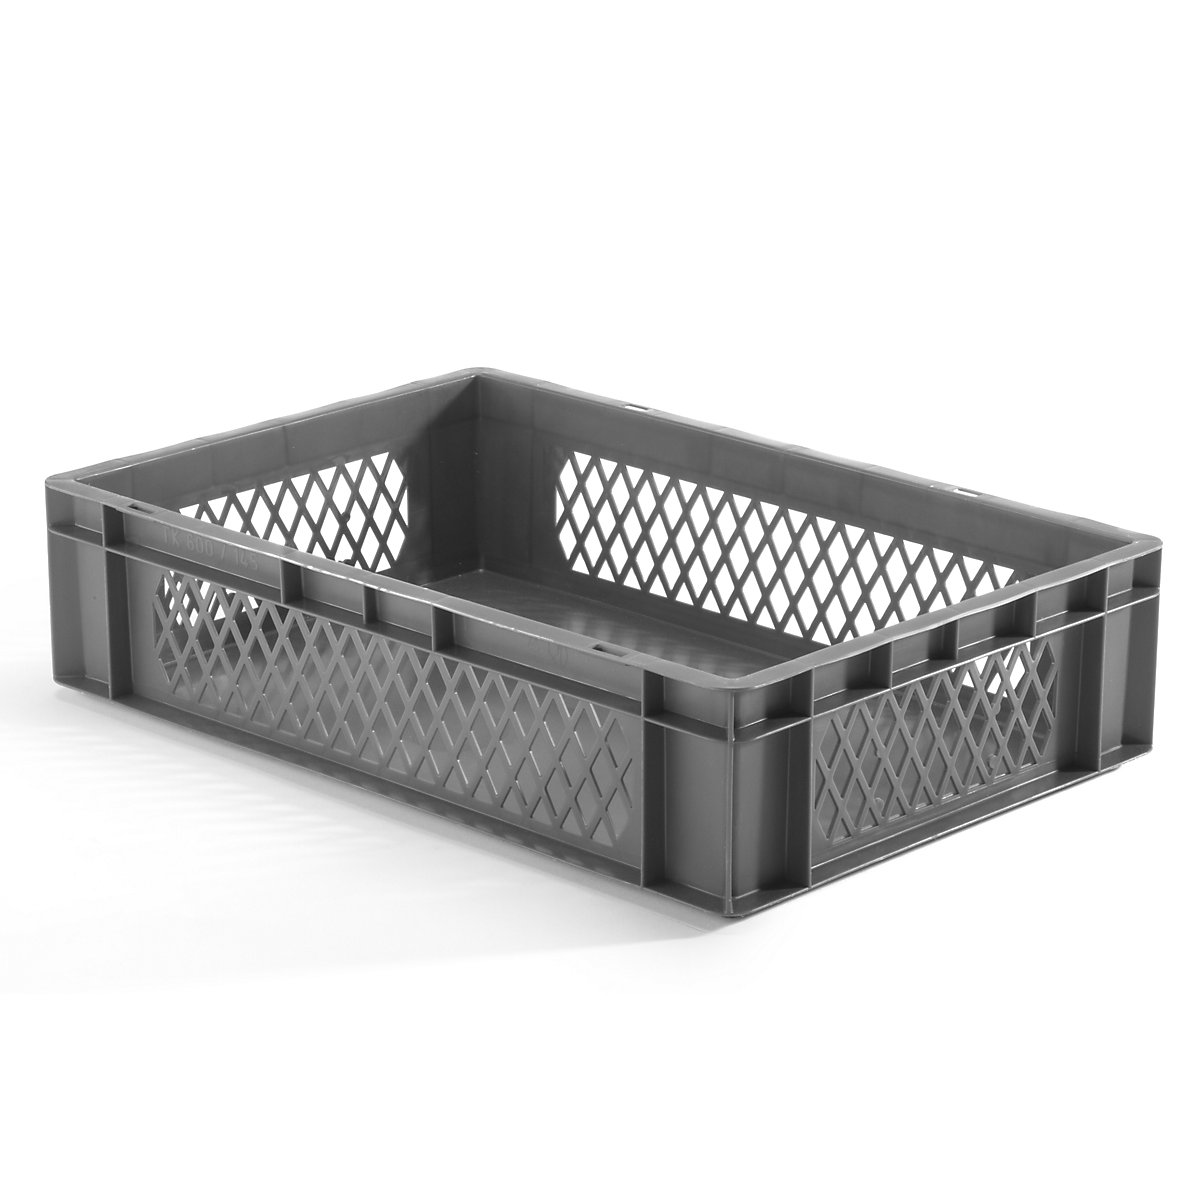 Euro stacking container, perforated walls, closed base, LxWxH 600 x 400 x 145 mm, grey, pack of 5